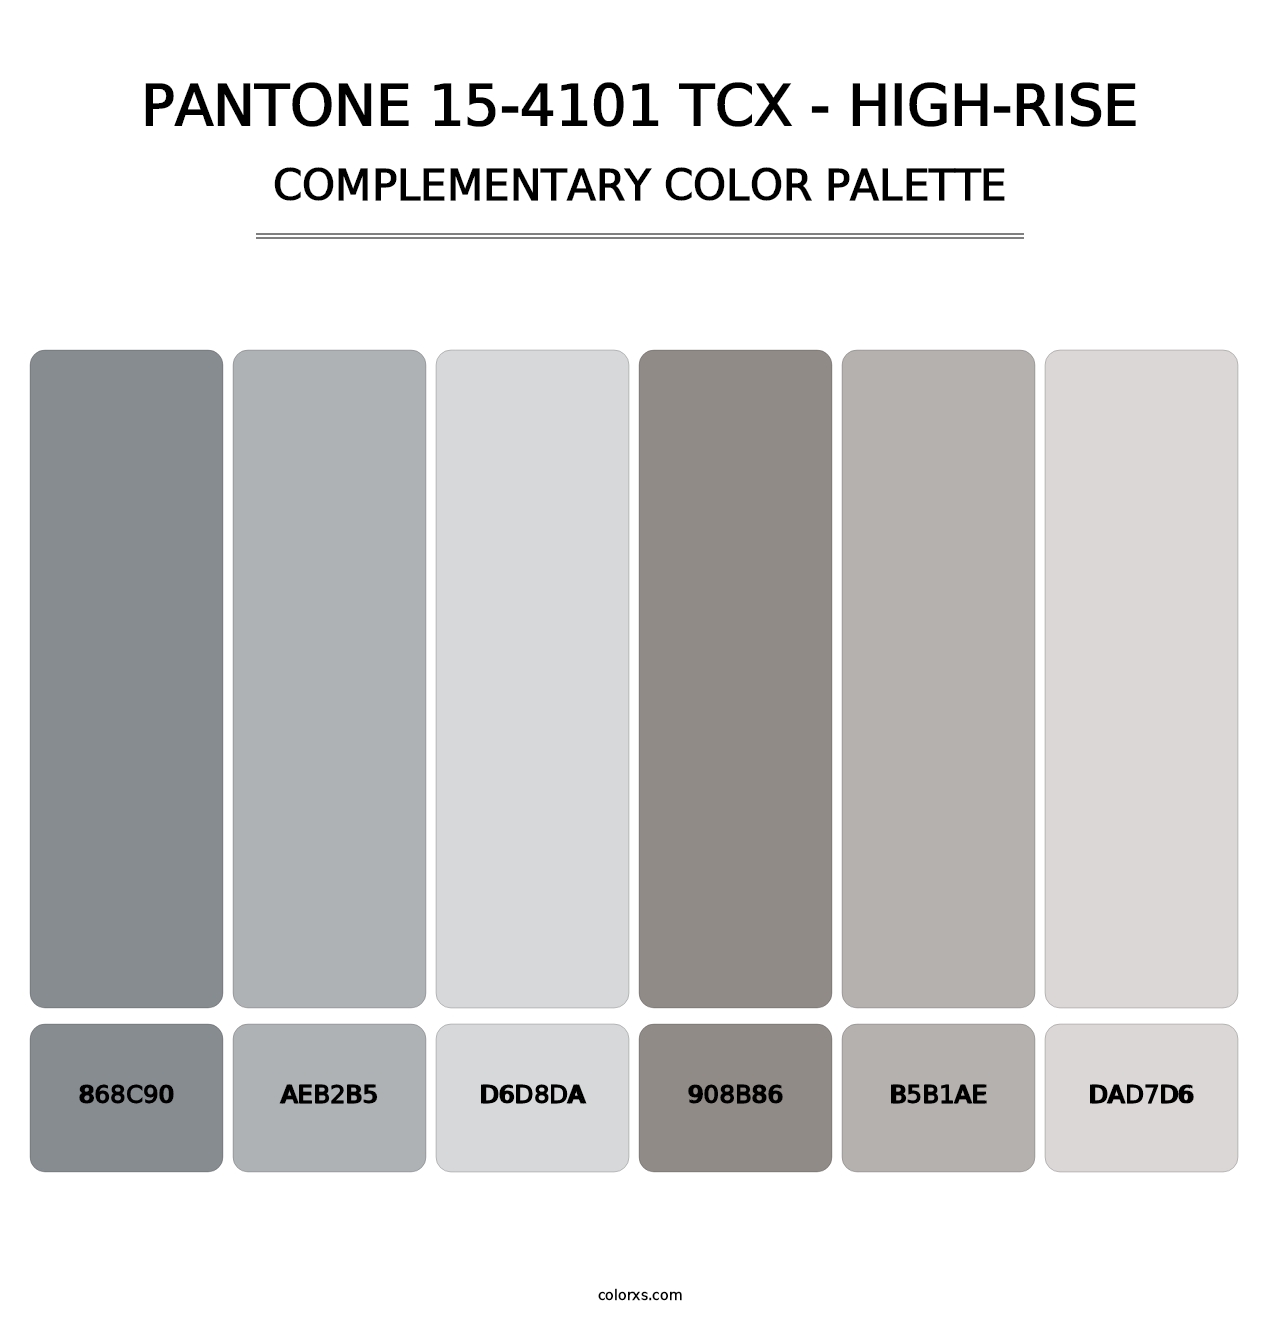 PANTONE 15-4101 TCX - High-rise - Complementary Color Palette